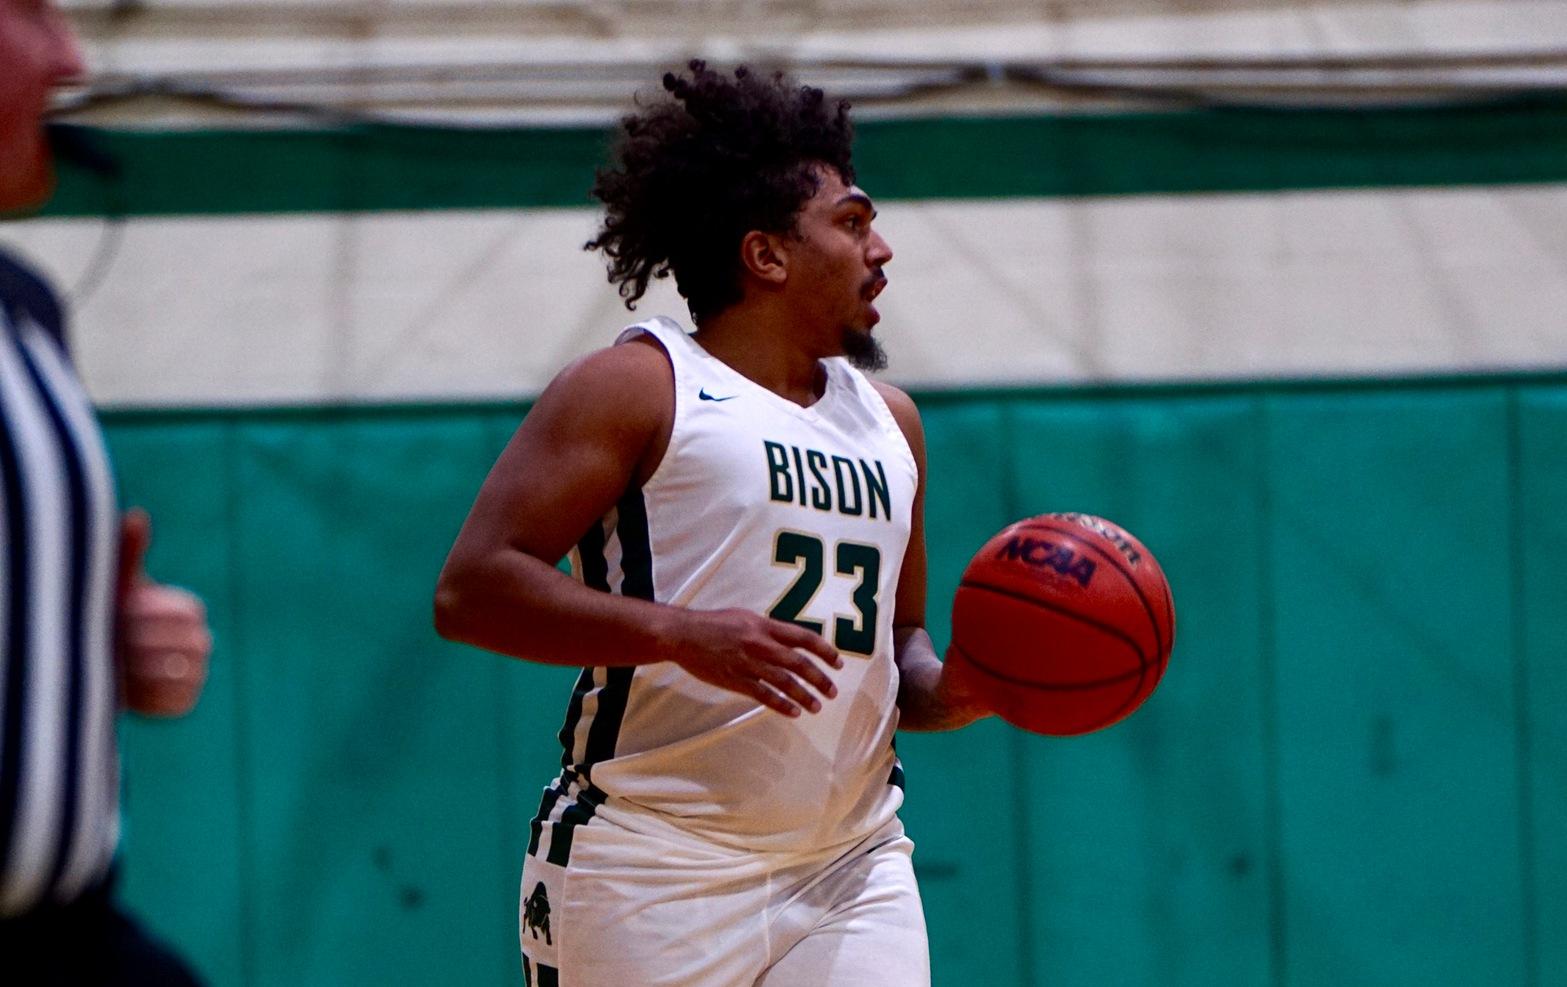 Men's Basketball: Slow Start Hinders Bison in 65-55 Lost to Lions